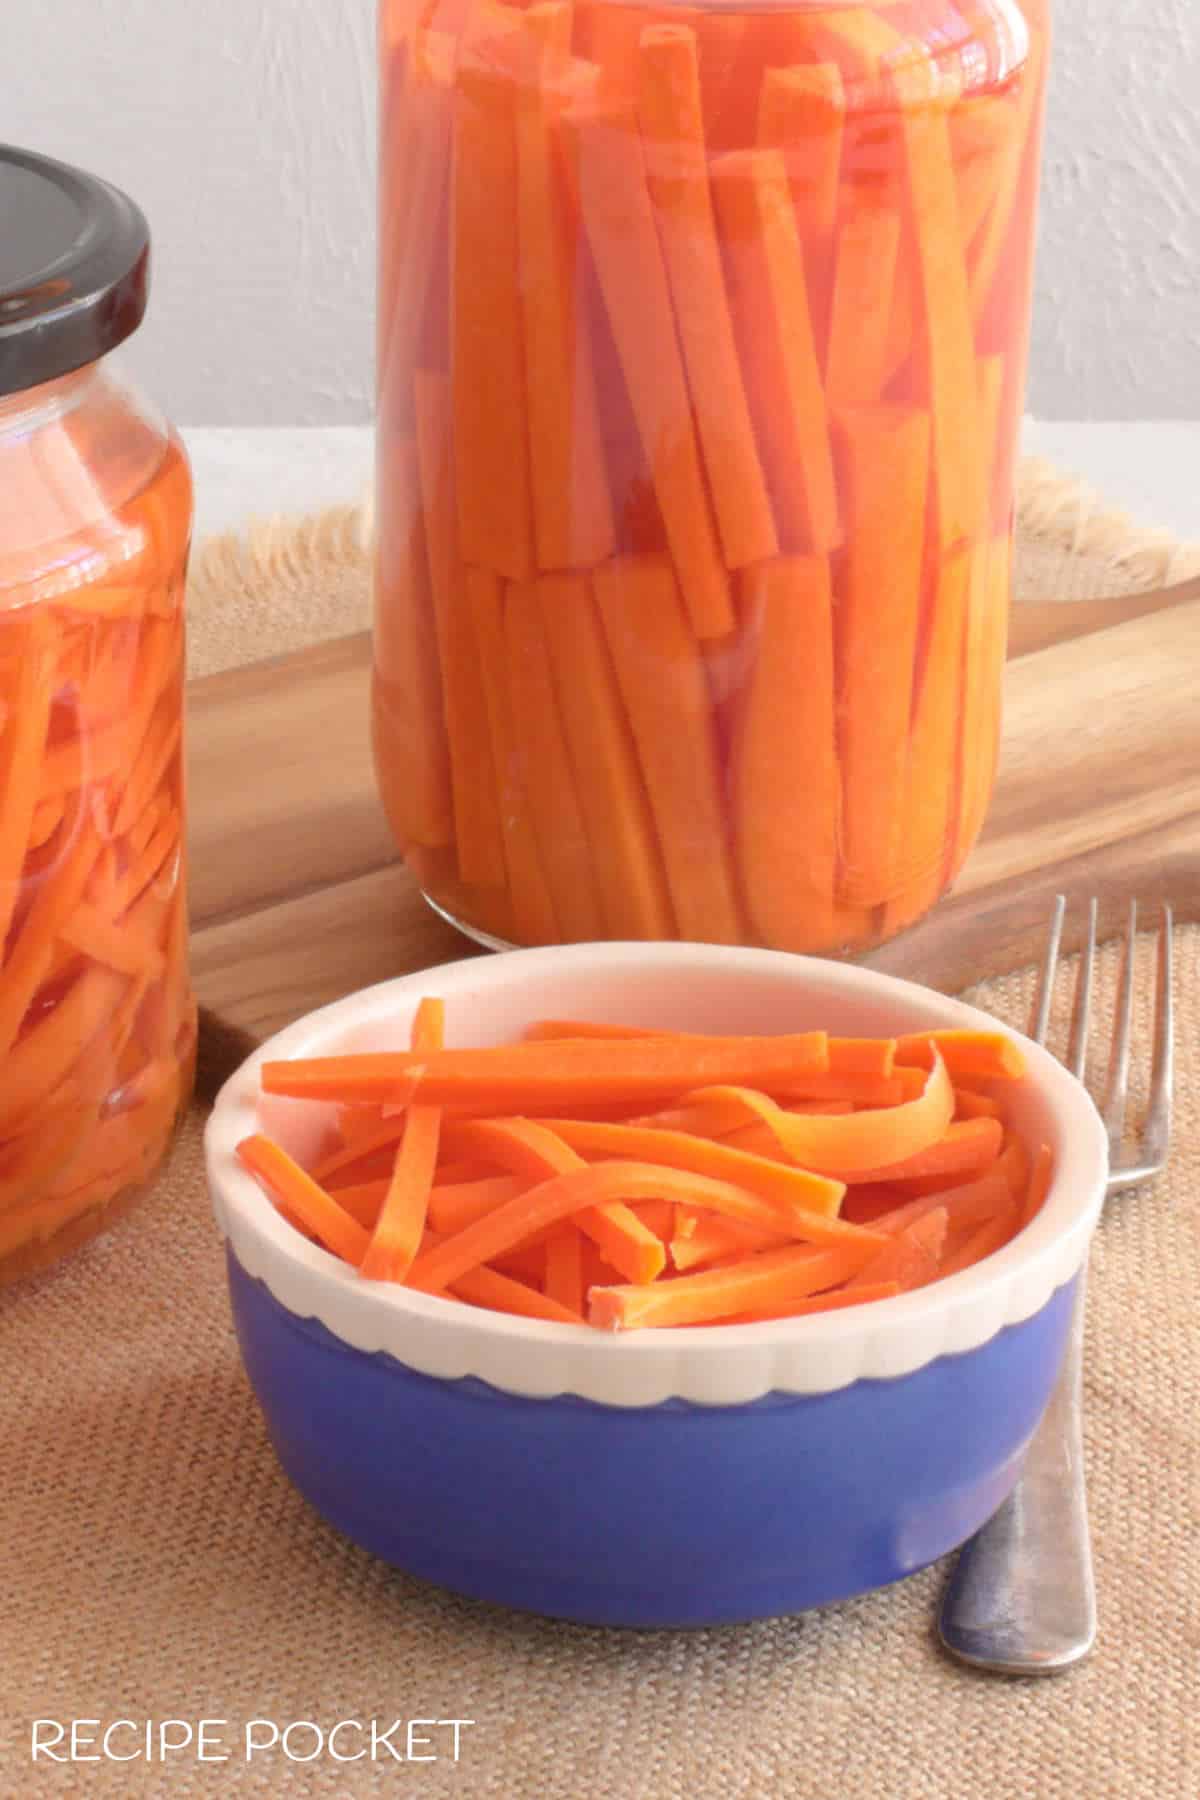 Closeup of carrot pickle in a small blue bowl.